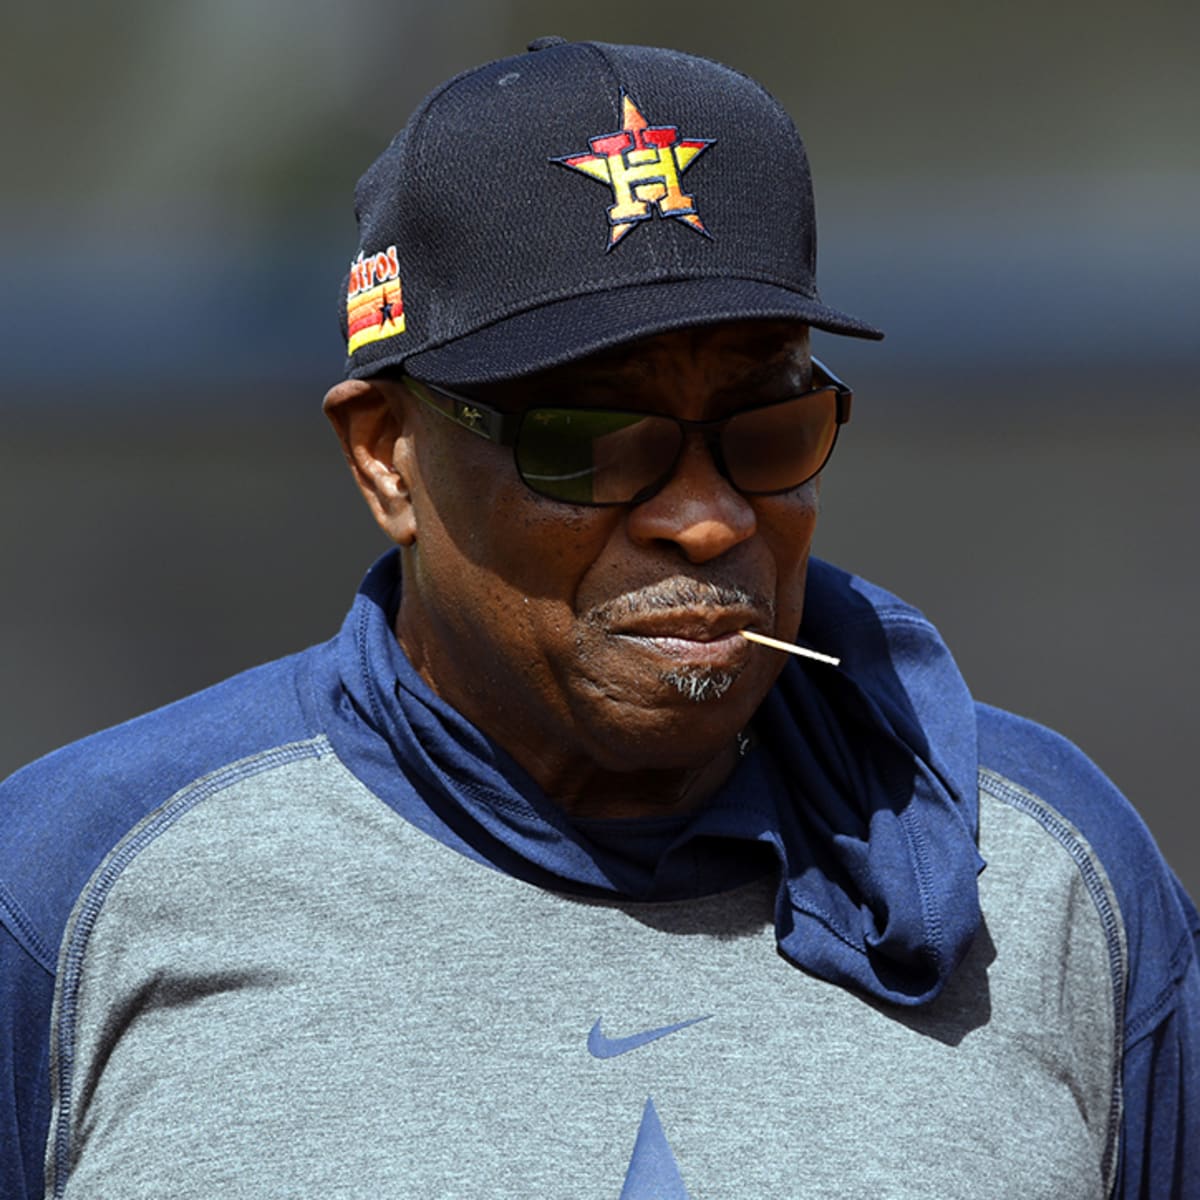 Dusty Baker Gave the Astros Some Dignity. Now Can They Re-sign Him?